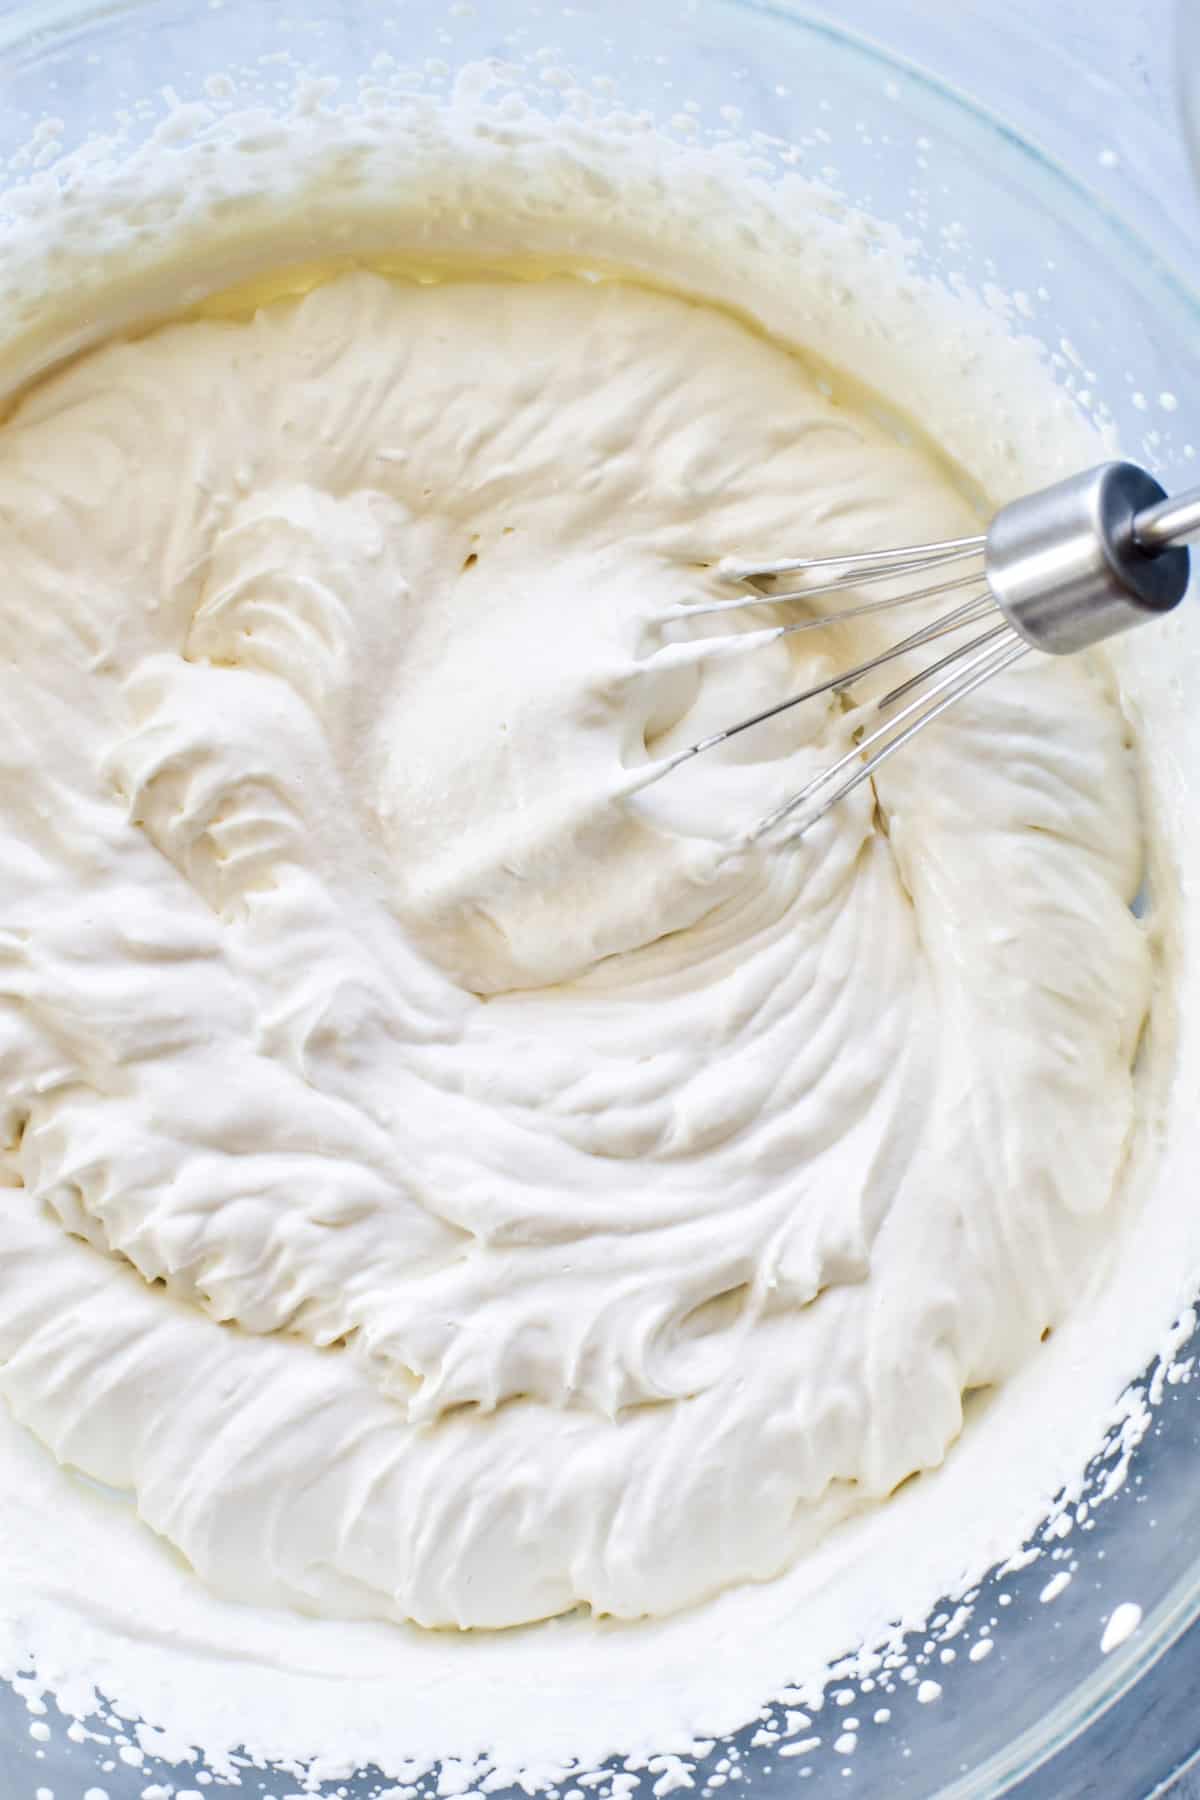 Homemade Cool Whip whipped in a glass mixing bowl